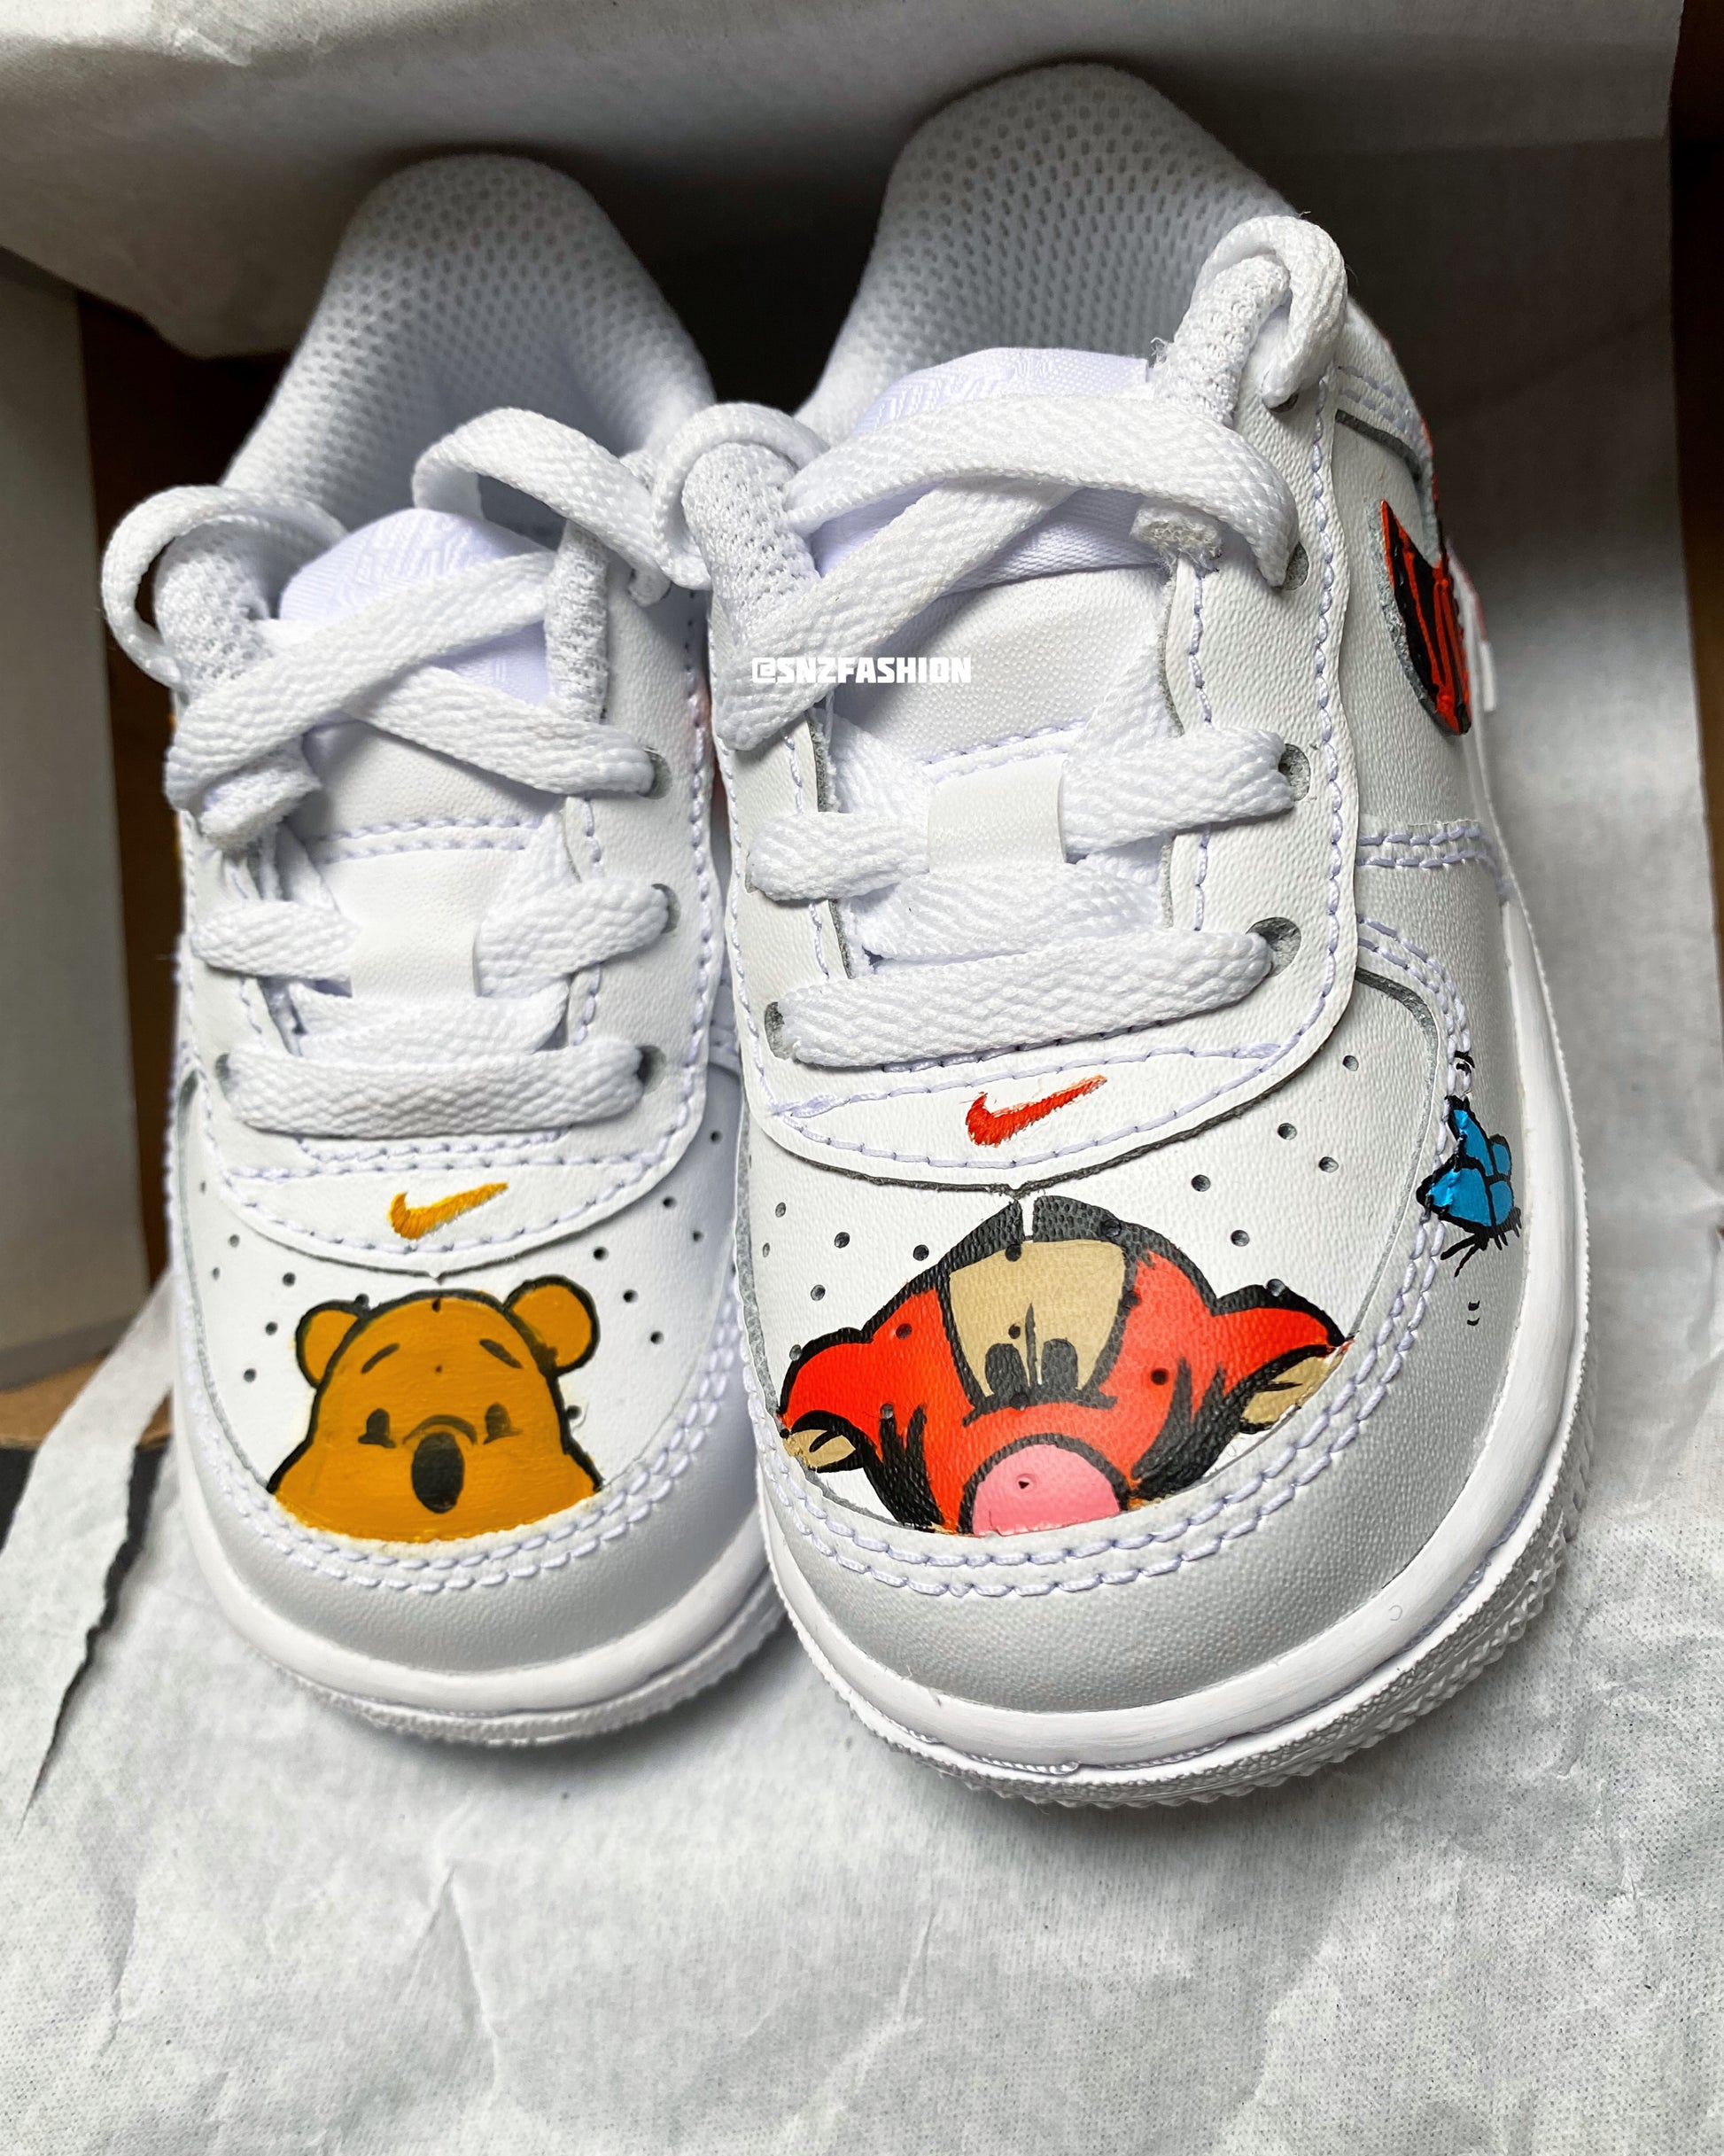 Winnie the Pooh Shoes 